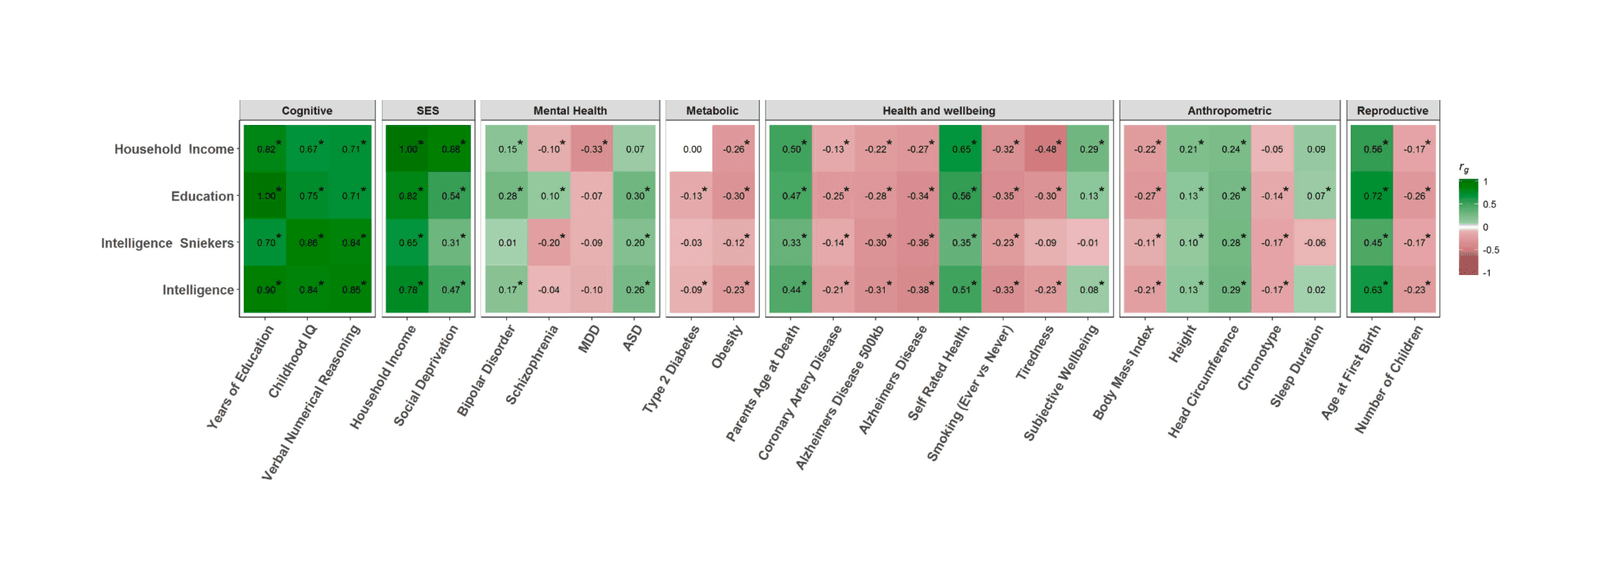 From Hill et al 2017: “Figure 4. Heat map showing the genetic correlations between the meta-analytic intelligence phenotype, intelligence, education, and household income, with 26 cognitive, SES, mental health, metabolic, health and well-being, anthropometric, and reproductive traits. Positive genetic correlations are shown in green and negative genetic correlations are shown in red. Statistical-significance following FDR correction is indicated by an asterisk.”